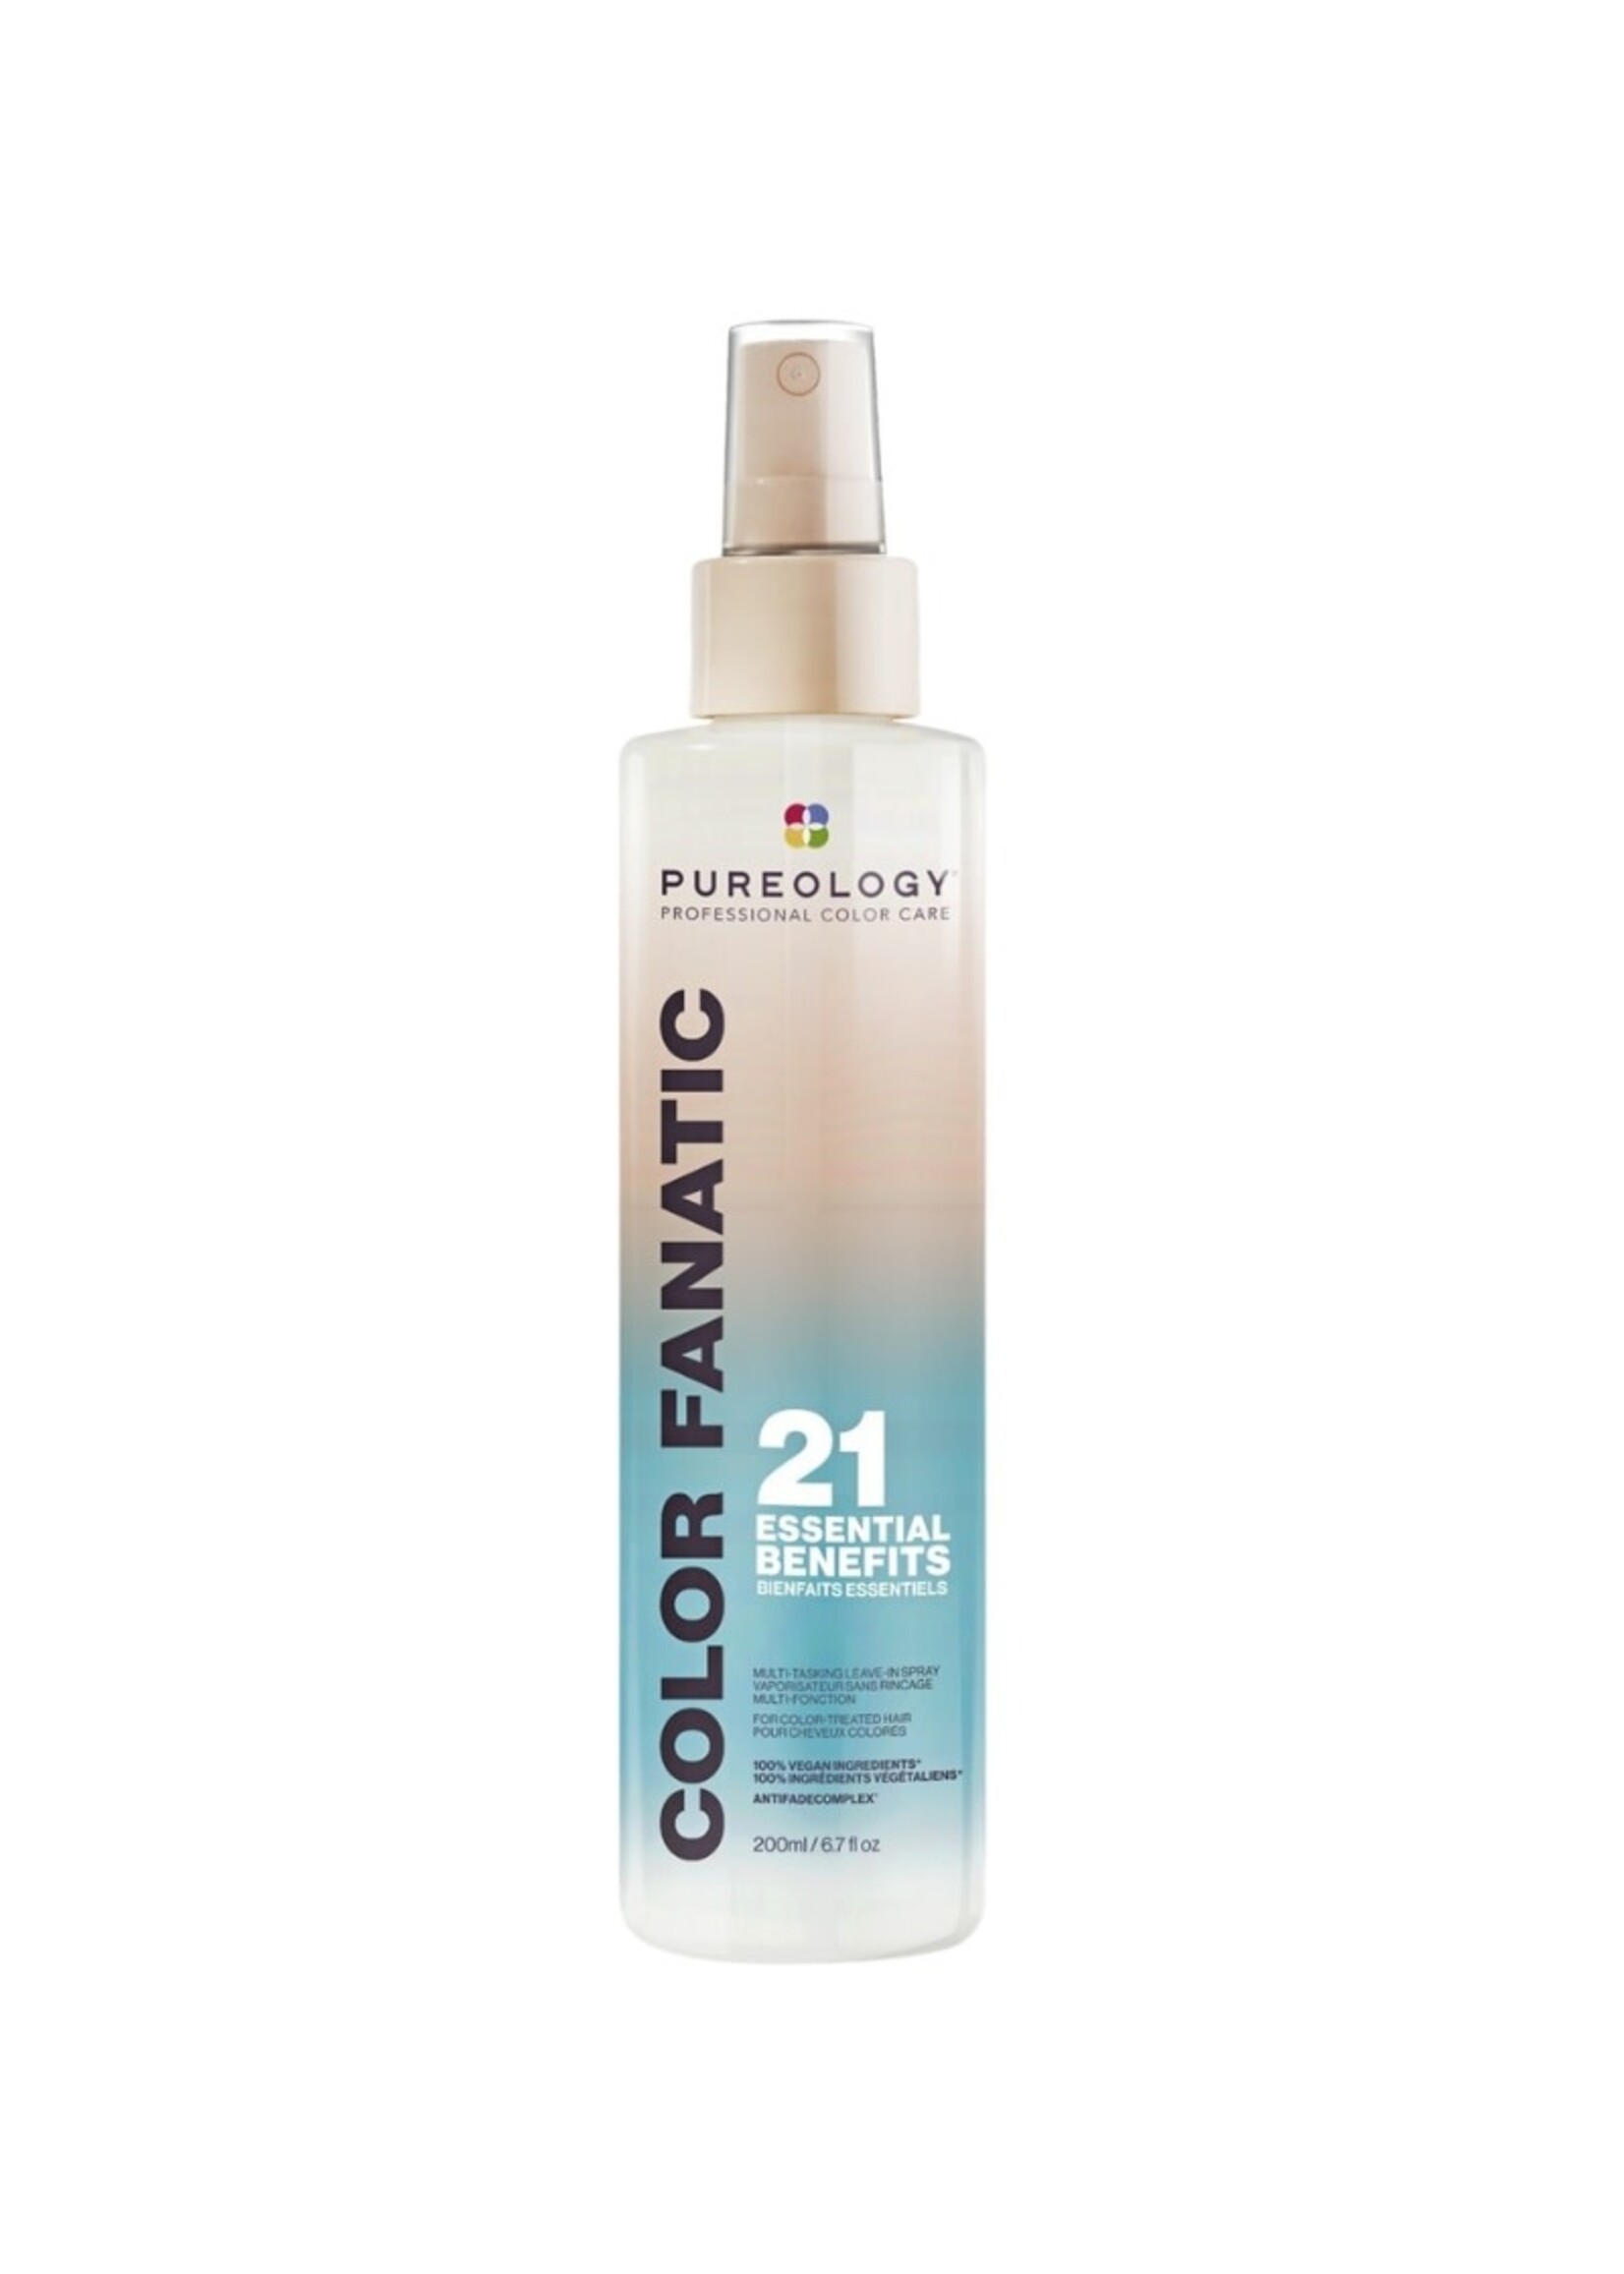 Pureology Pureology Colour Fanatic Multi-Tasking Leave-In Spray 200ml